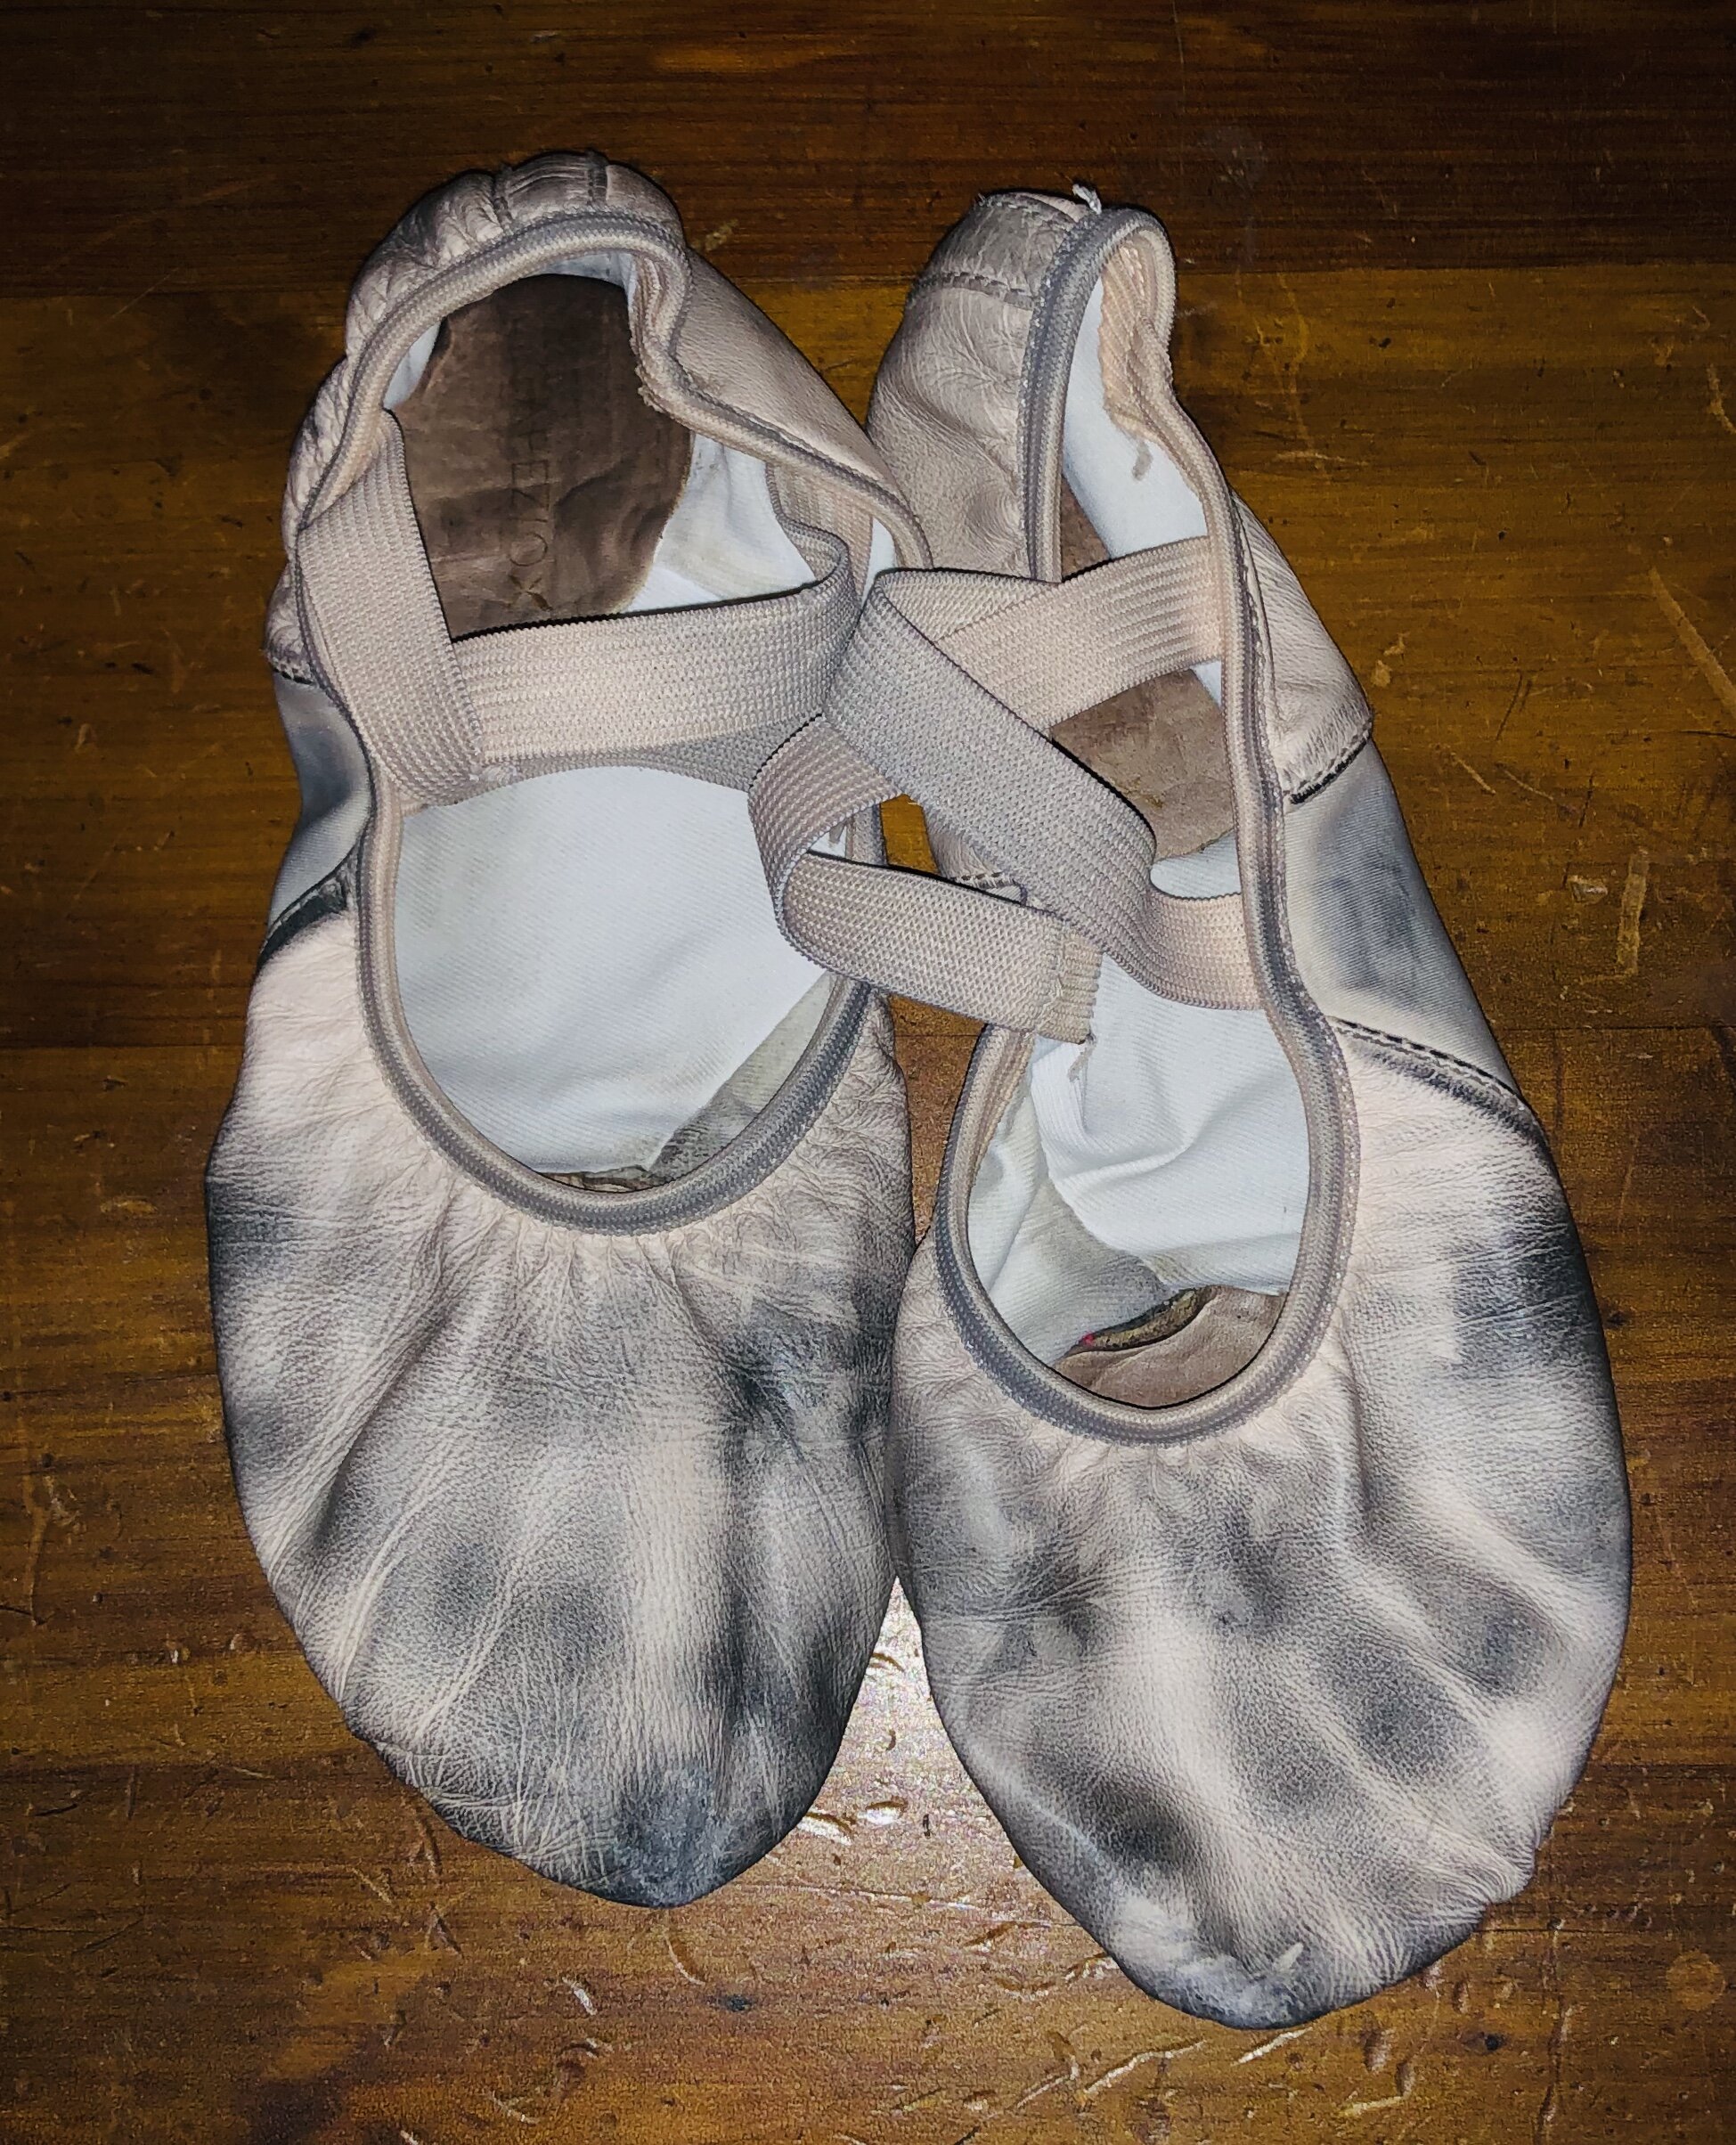 How to Clean Ballet Shoes?